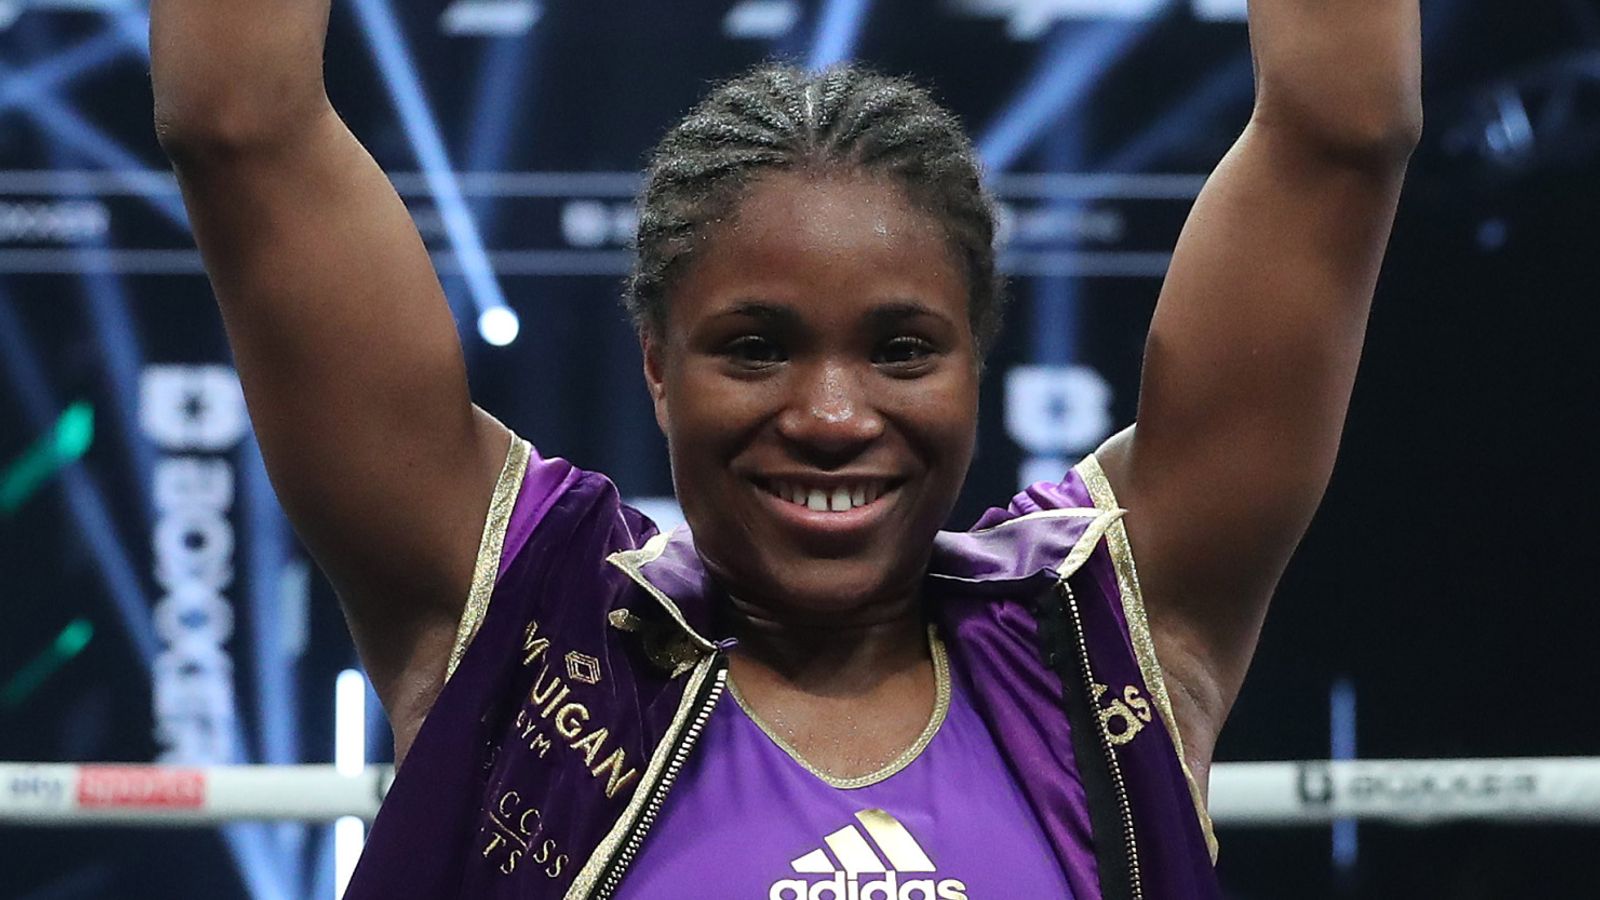 Caroline Dubois wants to build on success of Katie Taylor's victory over Amanda Serrano, says promoter Ben Shalom